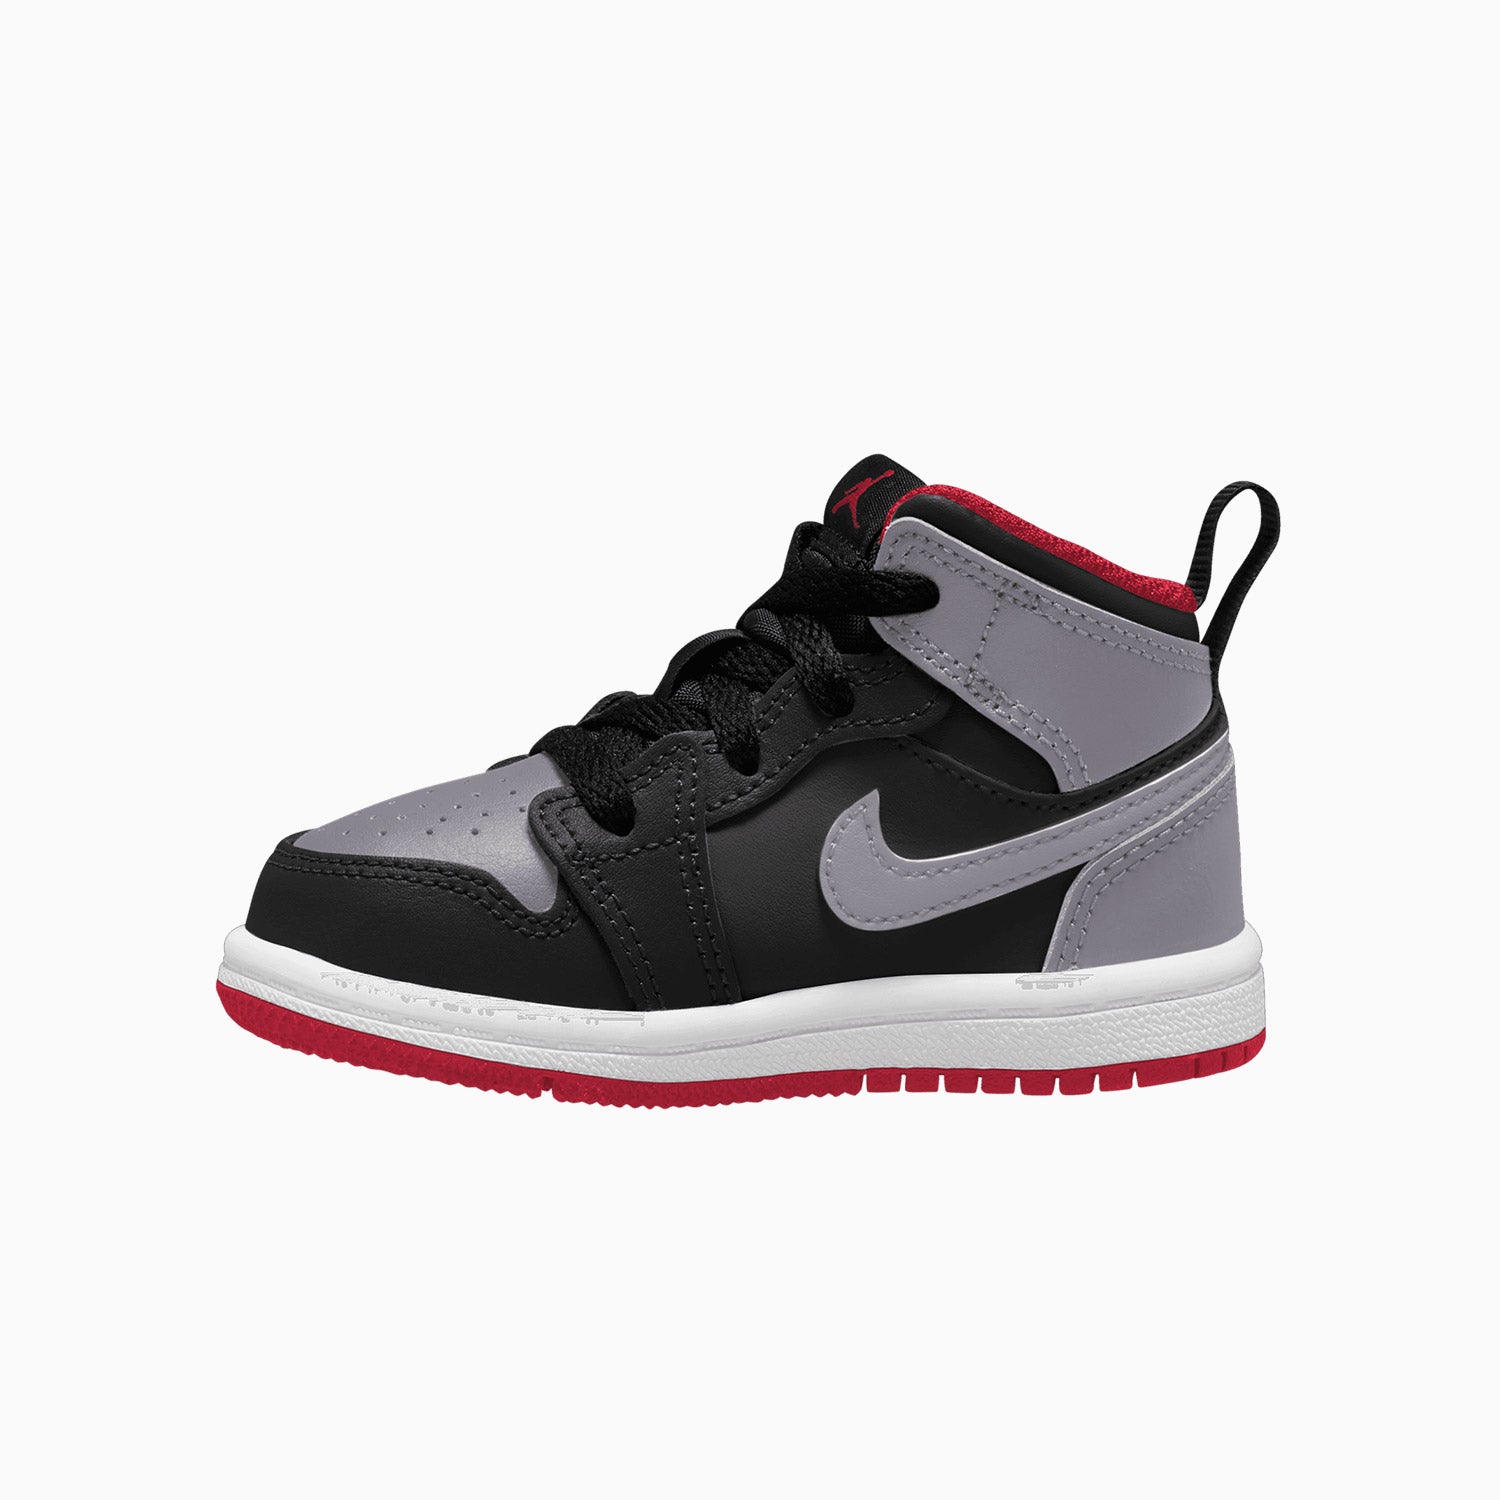 kids-air-jordan-1-mid-cement-grey-toddlers-shoes-dq8425-006